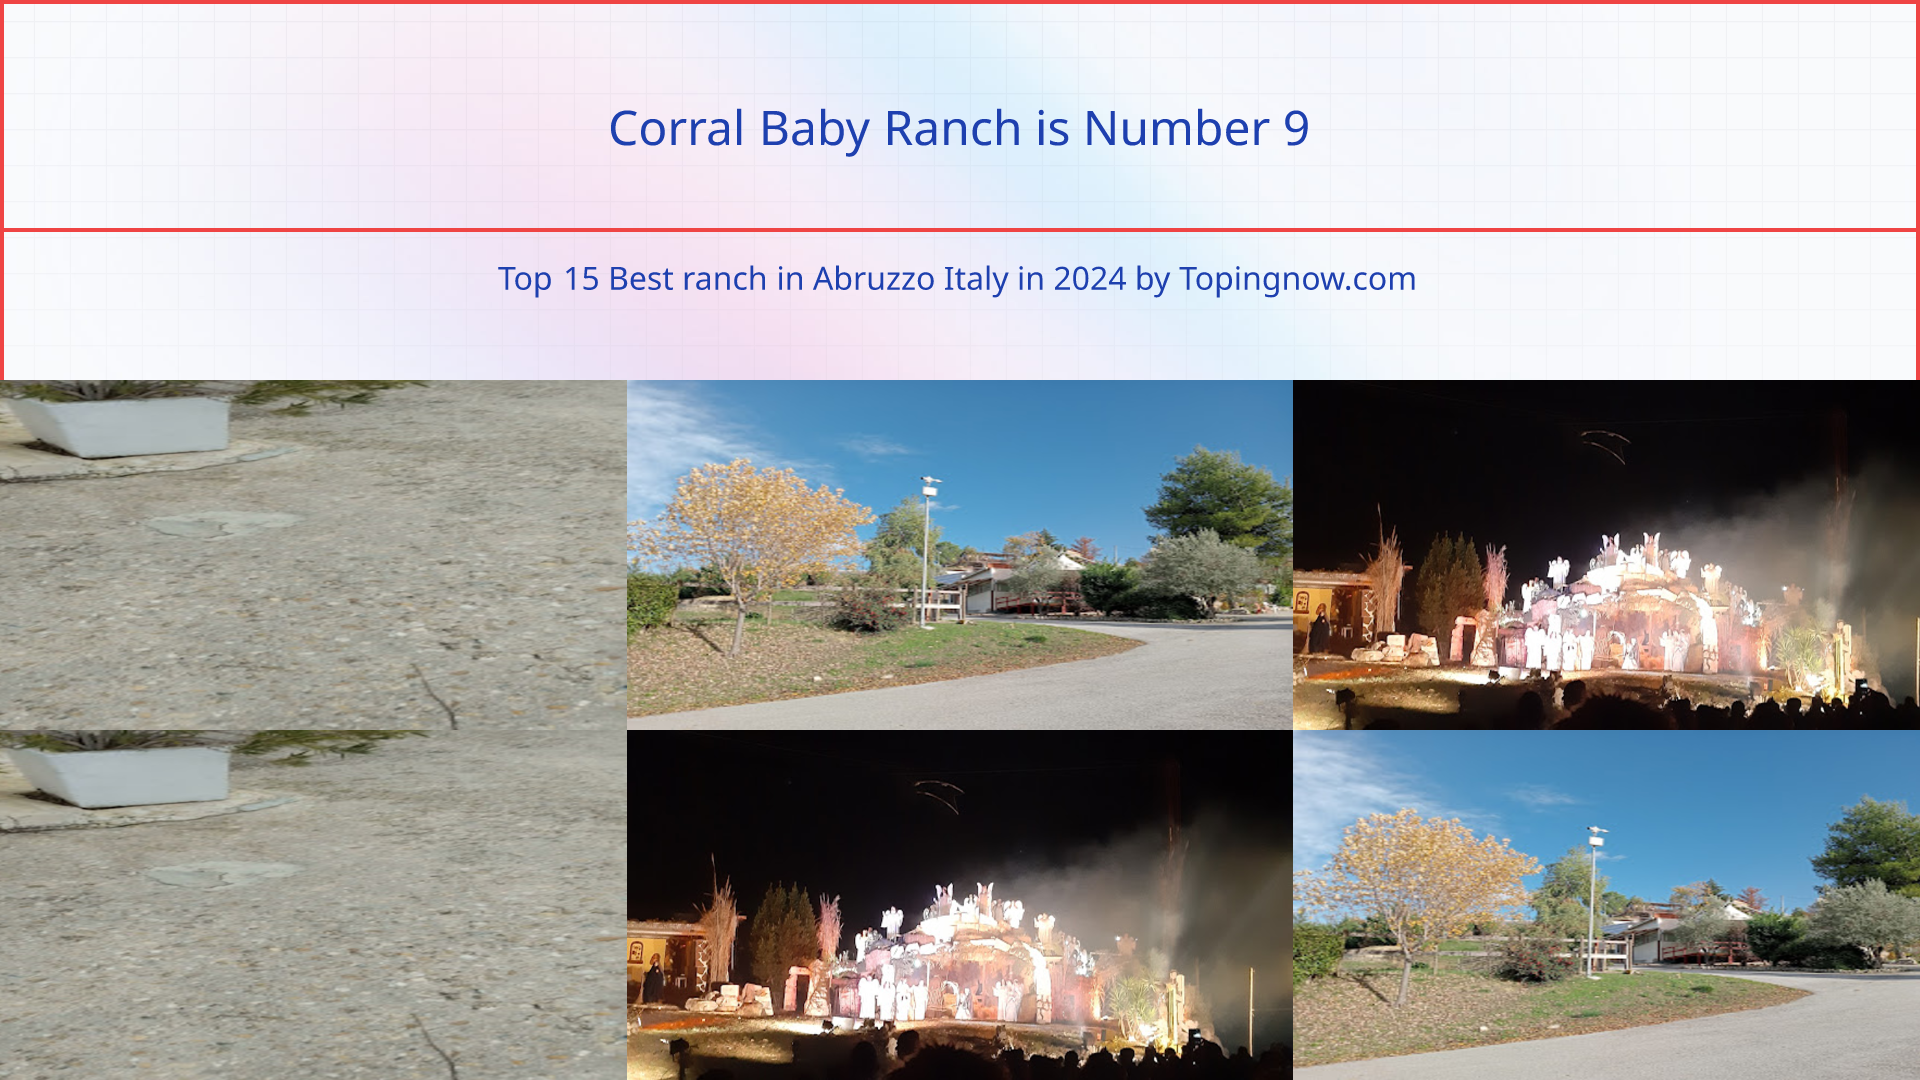 Corral Baby Ranch: Top 15 Best ranch in Abruzzo Italy in 2024